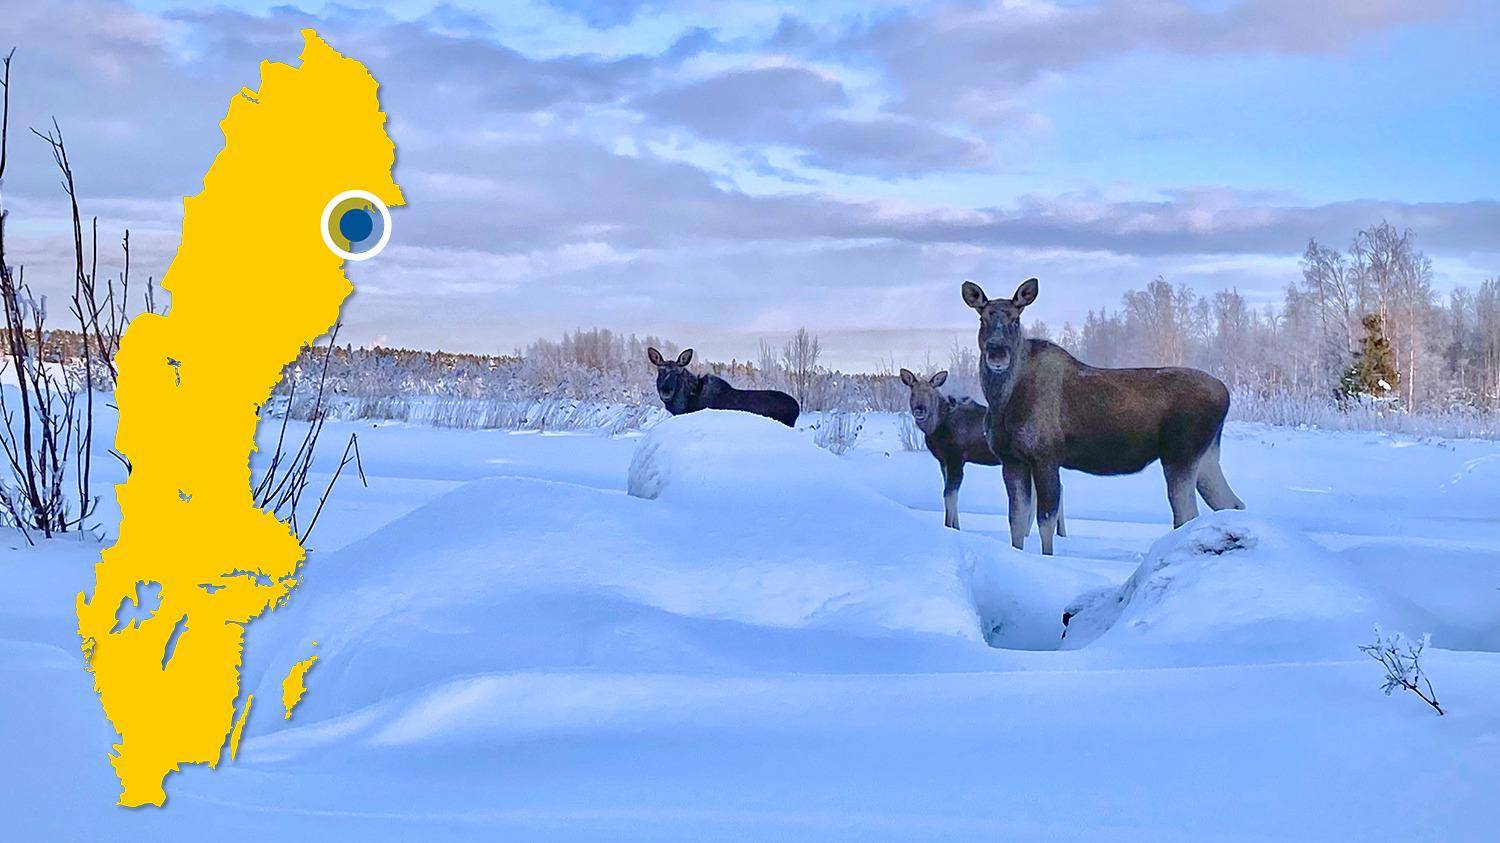 Three moose are standing in a snow-covered landscape. There is a yellow map of Sweden with a blue dot that marks Kallax.